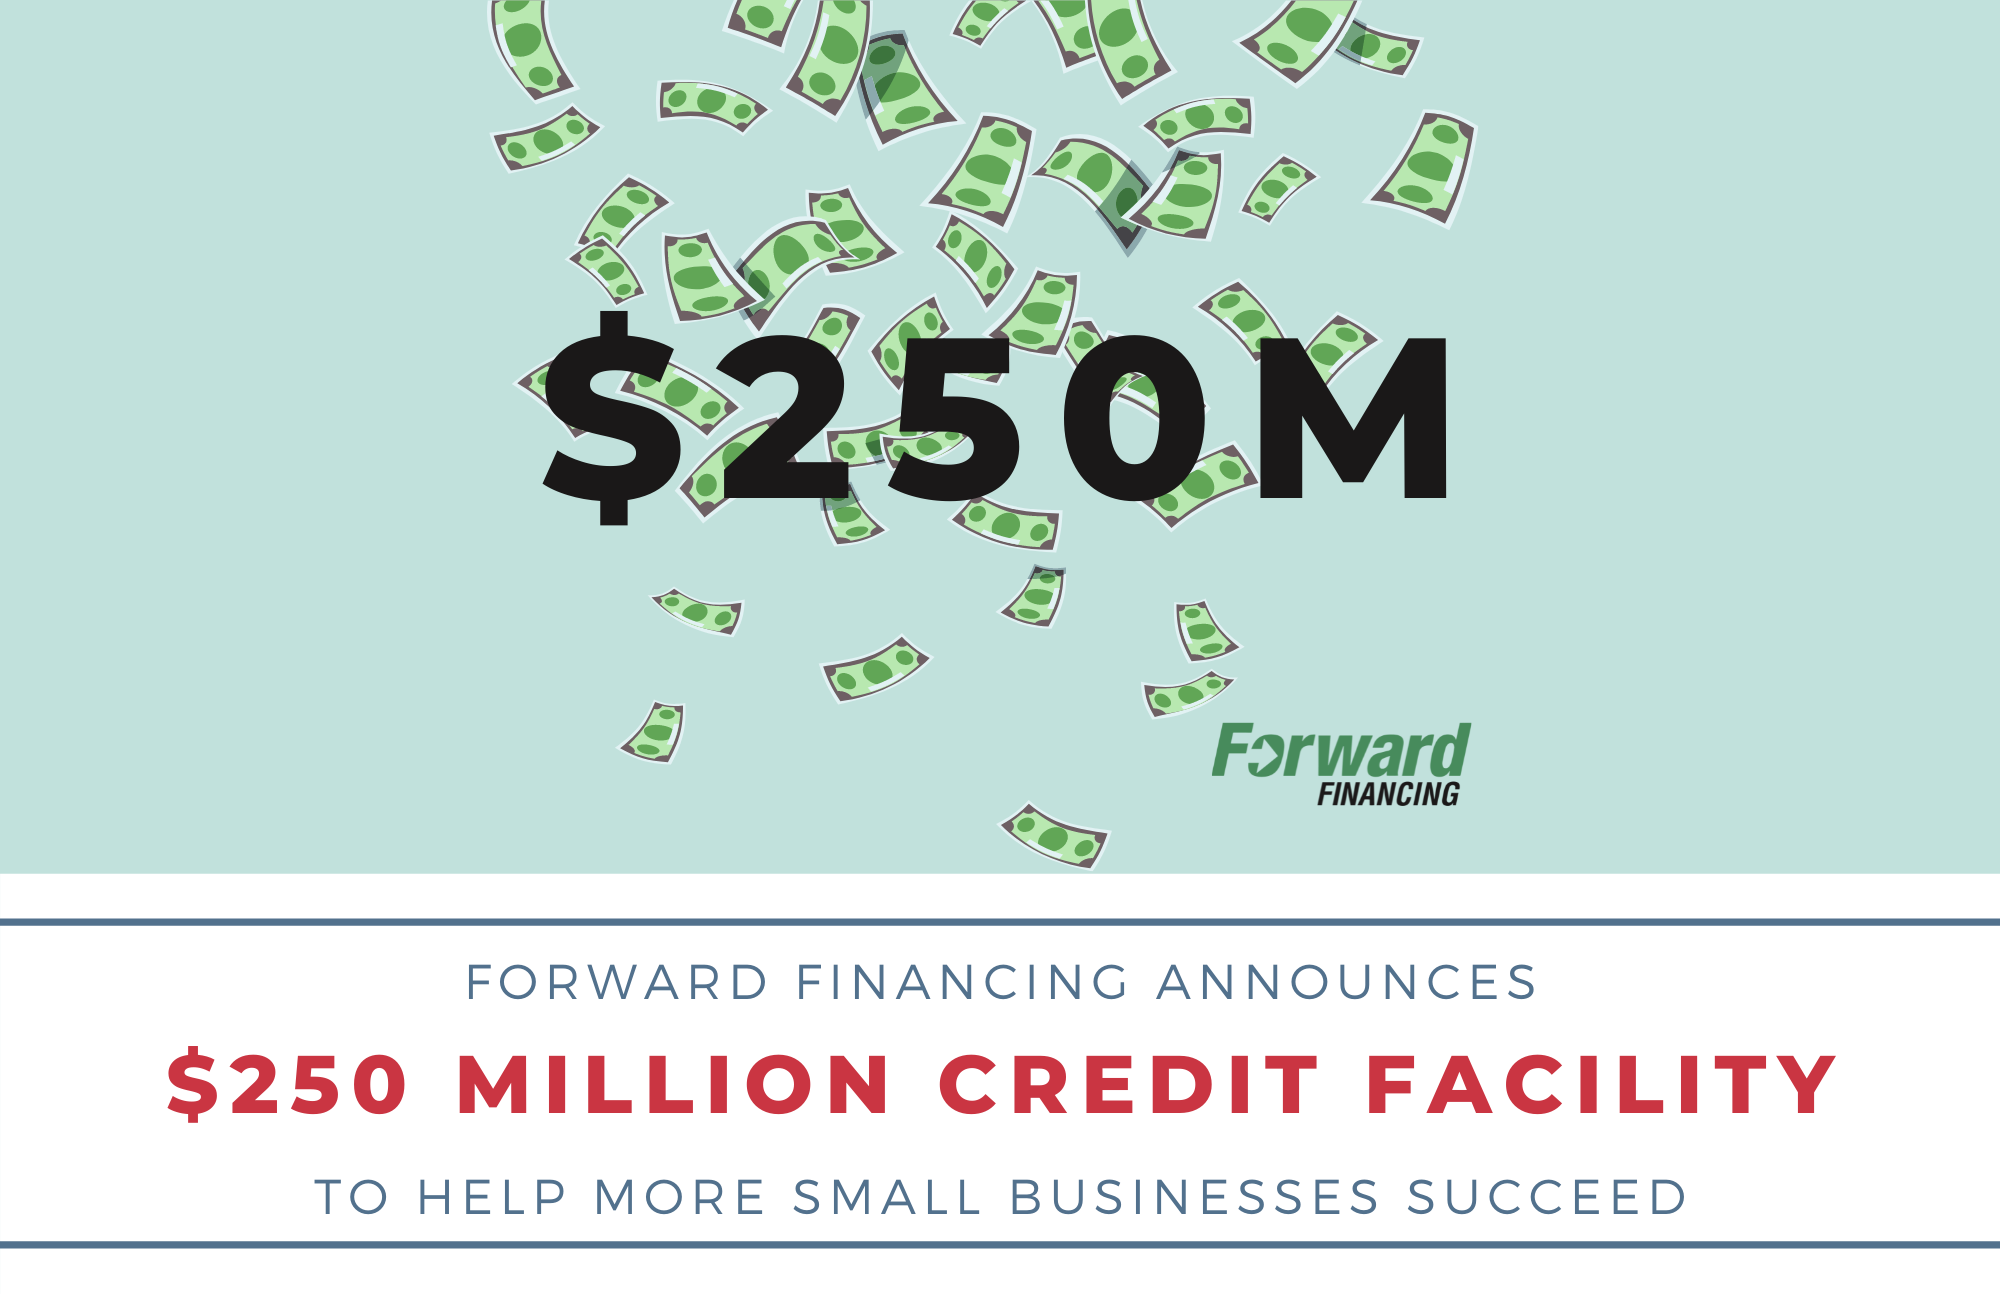 Forward Financing Announces $250 Million Credit Facility to Support Long-Term Growth